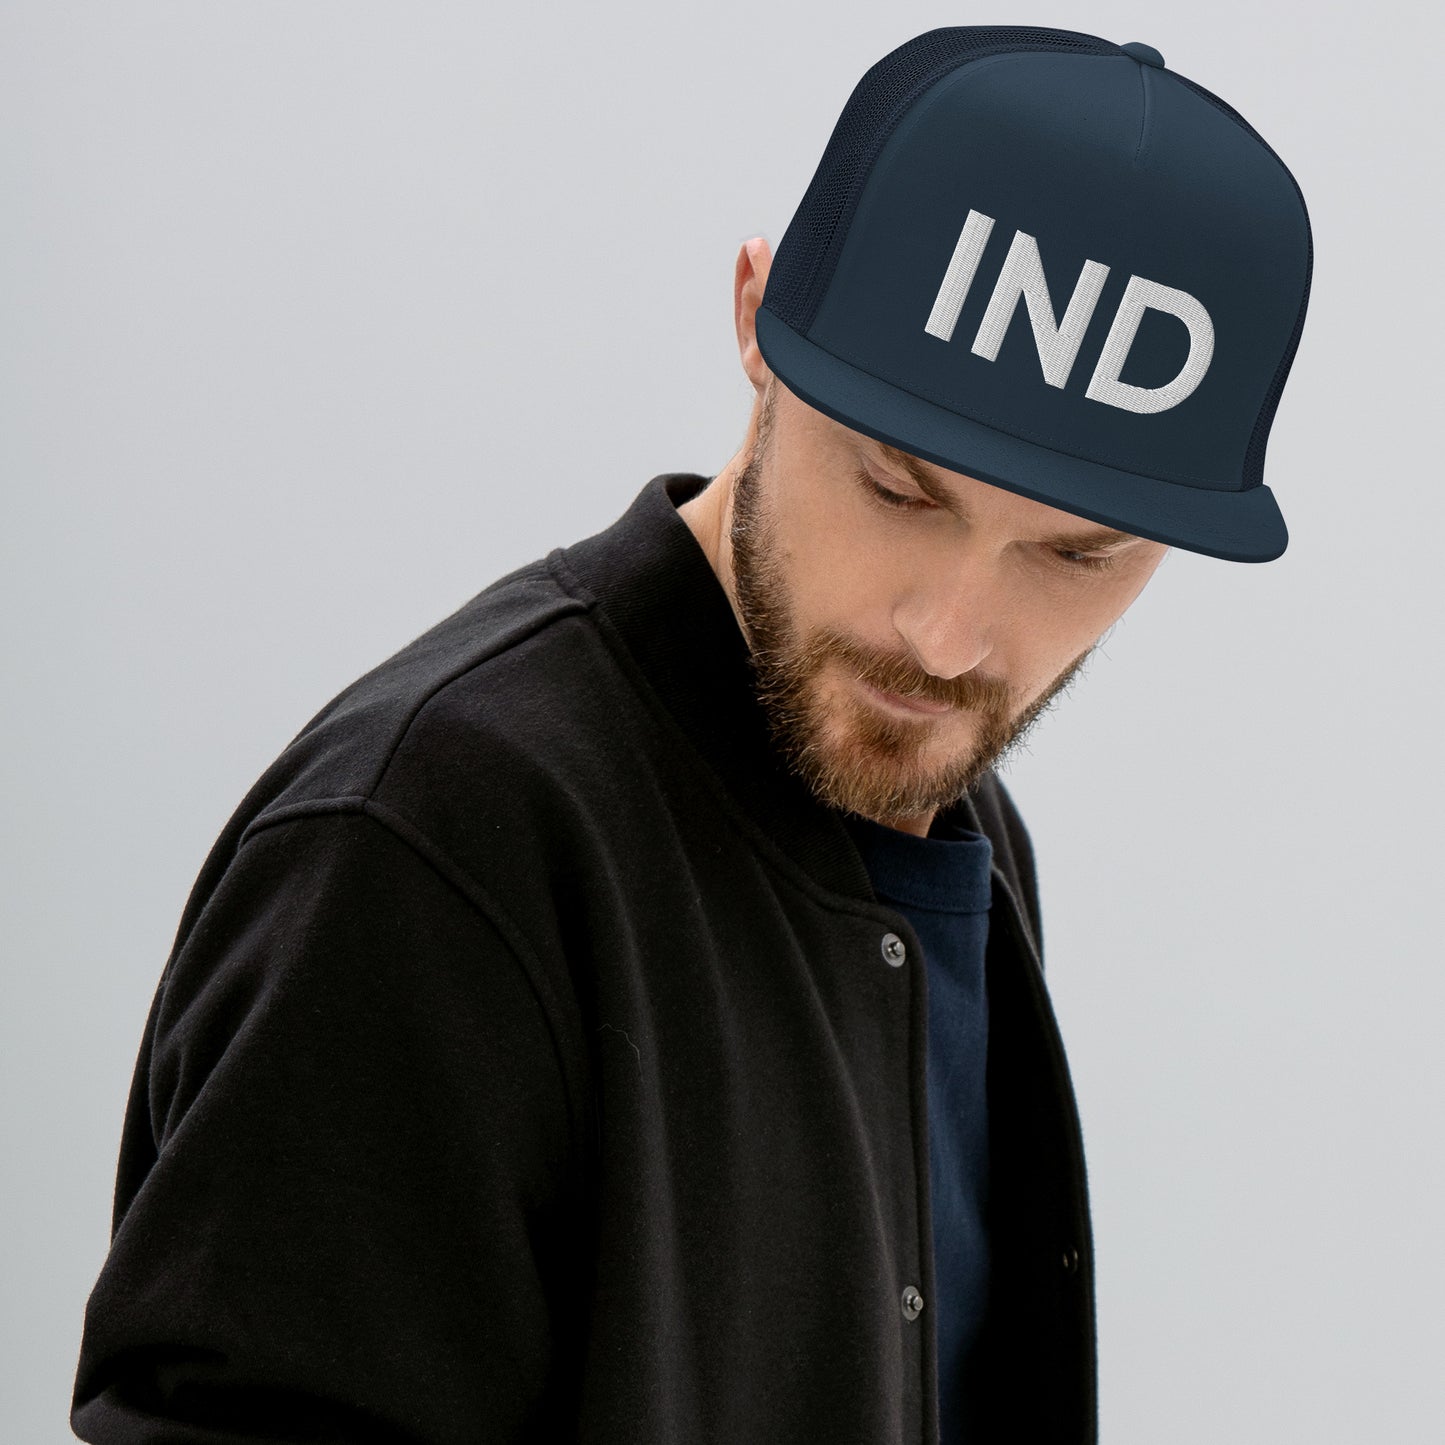 IND Indianapolis Strong Trucker Hat